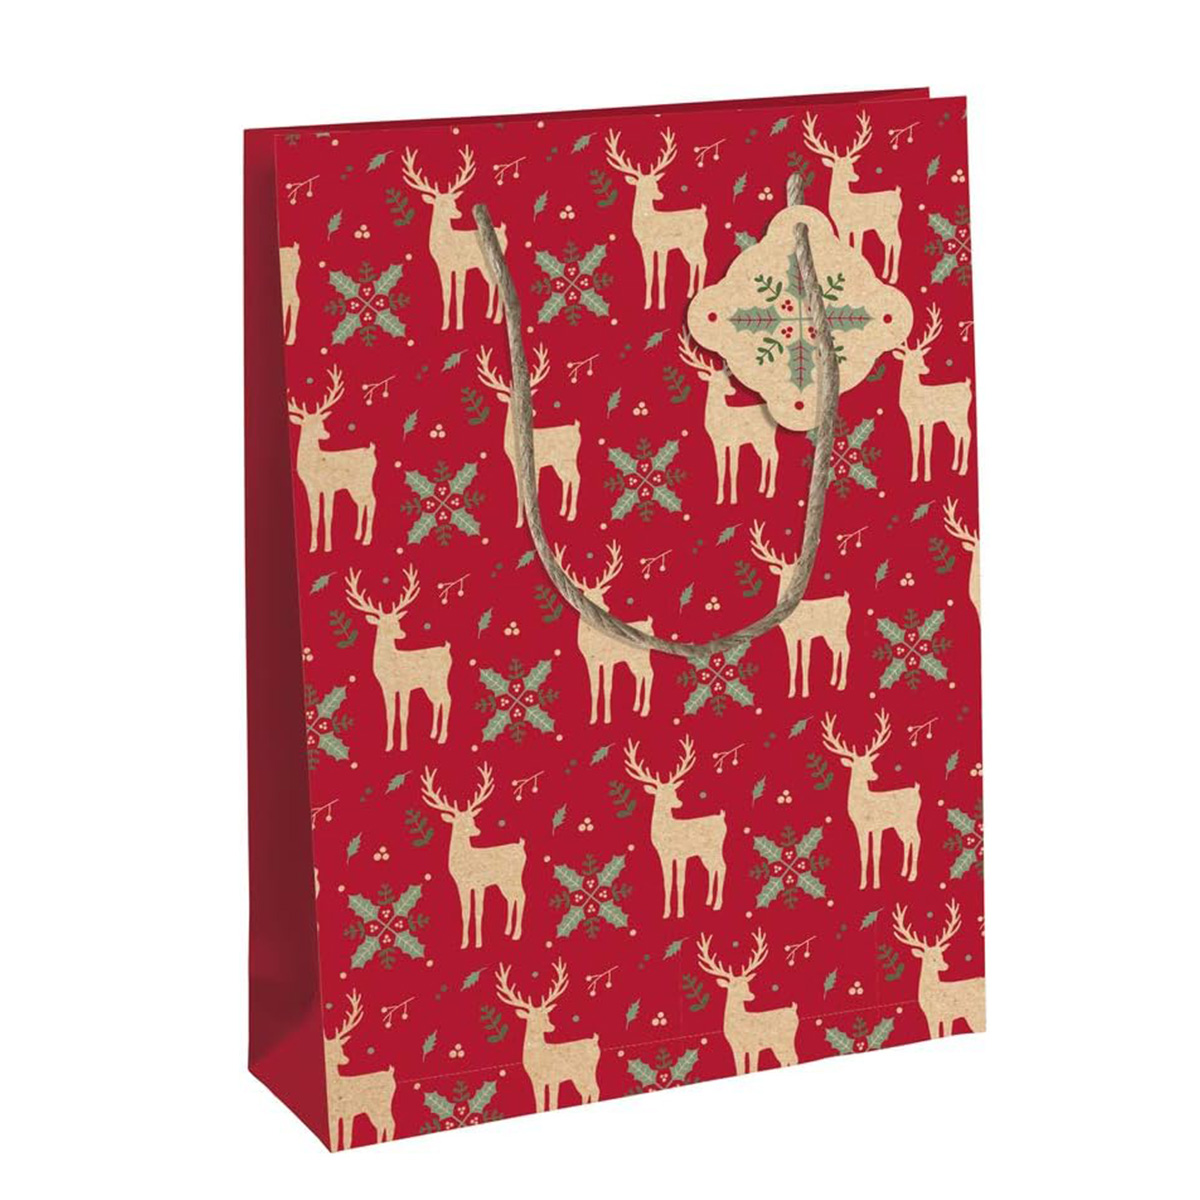 Clairefontaine gift bag Christmas reindeer home red Mittel 33 x 26,5 x 14 cm